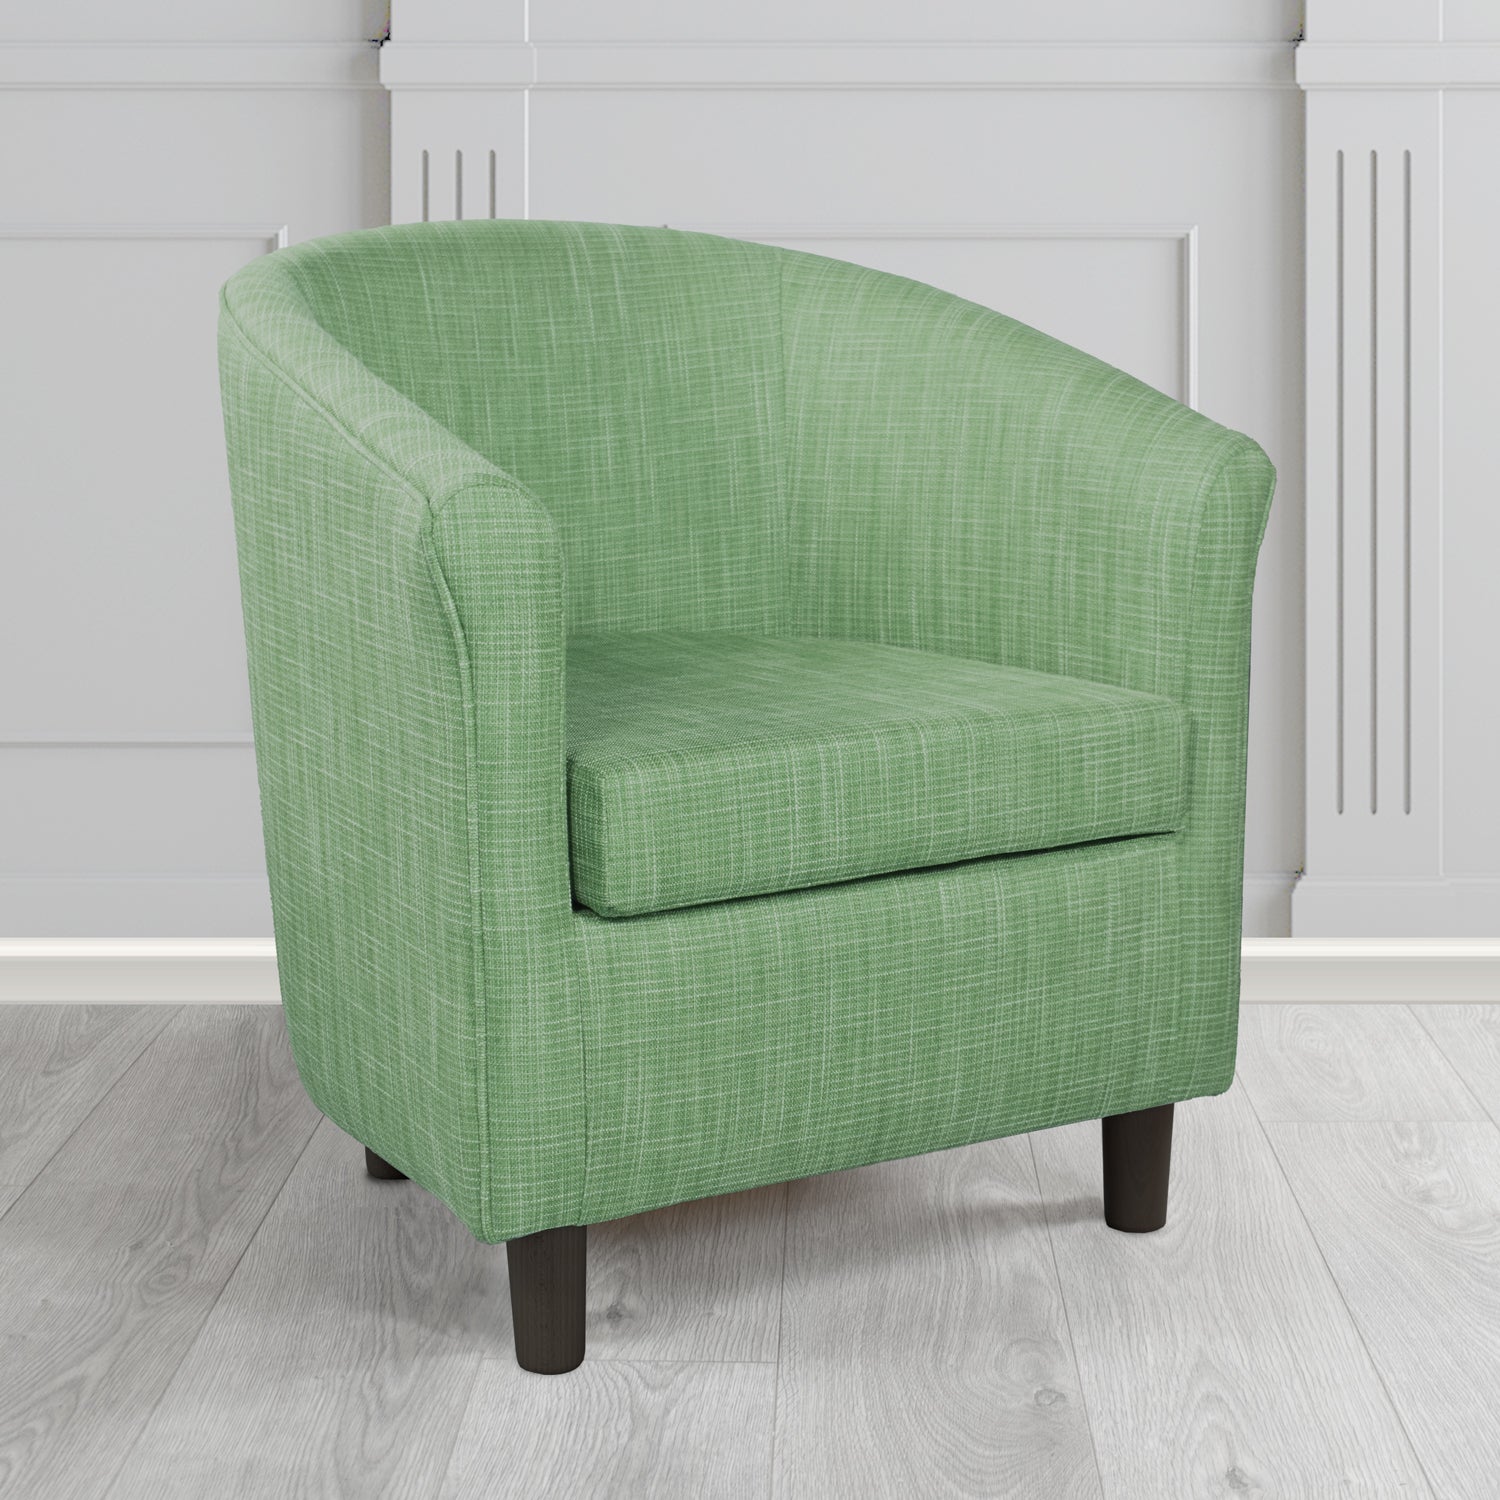 Tuscany Ravel Aspen Contract Crib 5 Fabric Tub Chair - Antimicrobial & Water-Resistant - The Tub Chair Shop